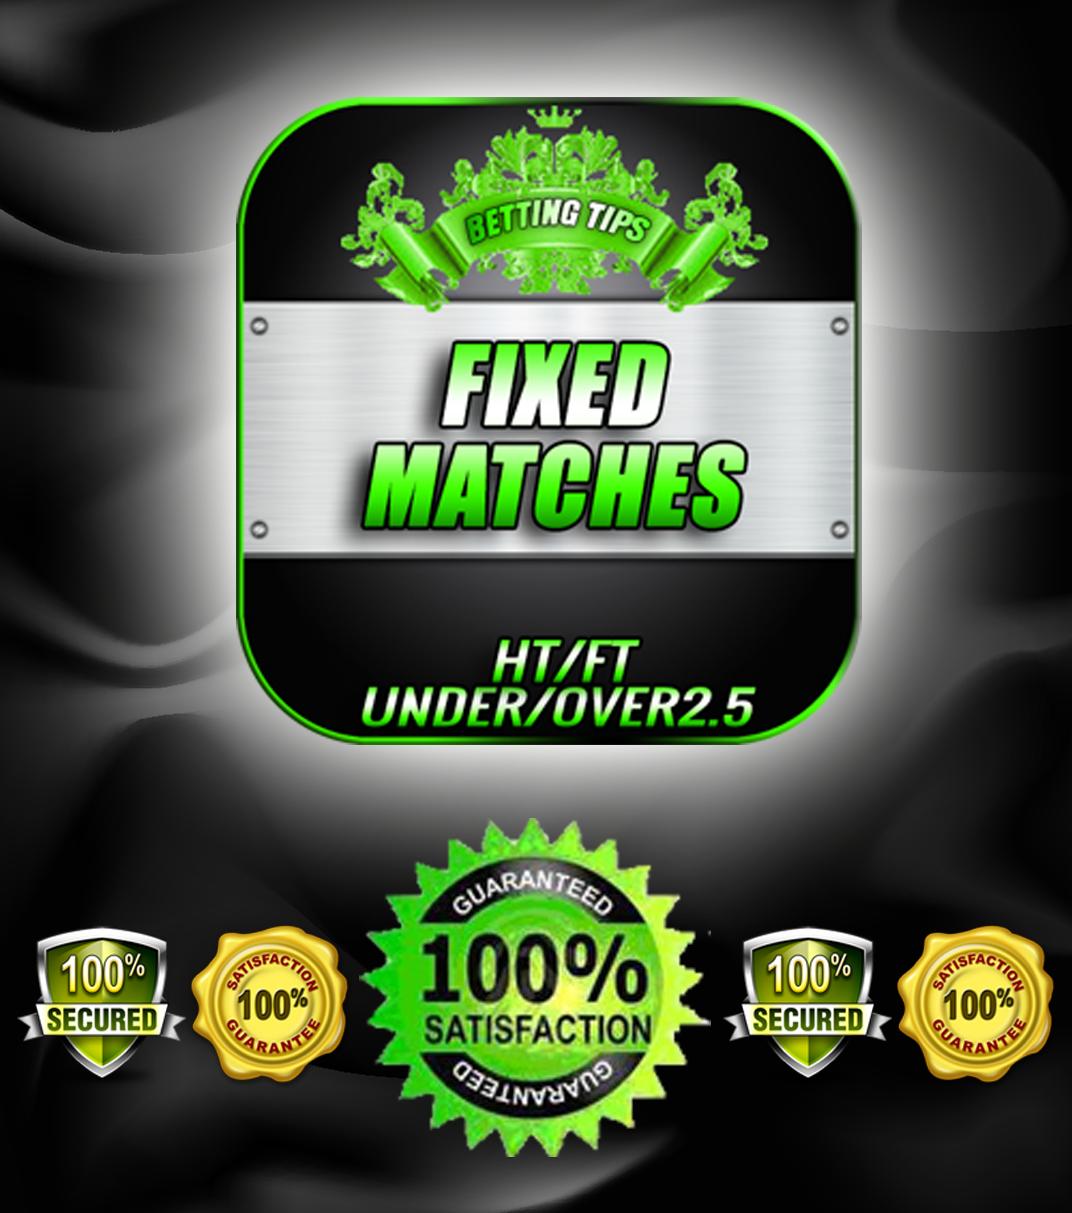 Fixed Matches Pro for Android - APK Download